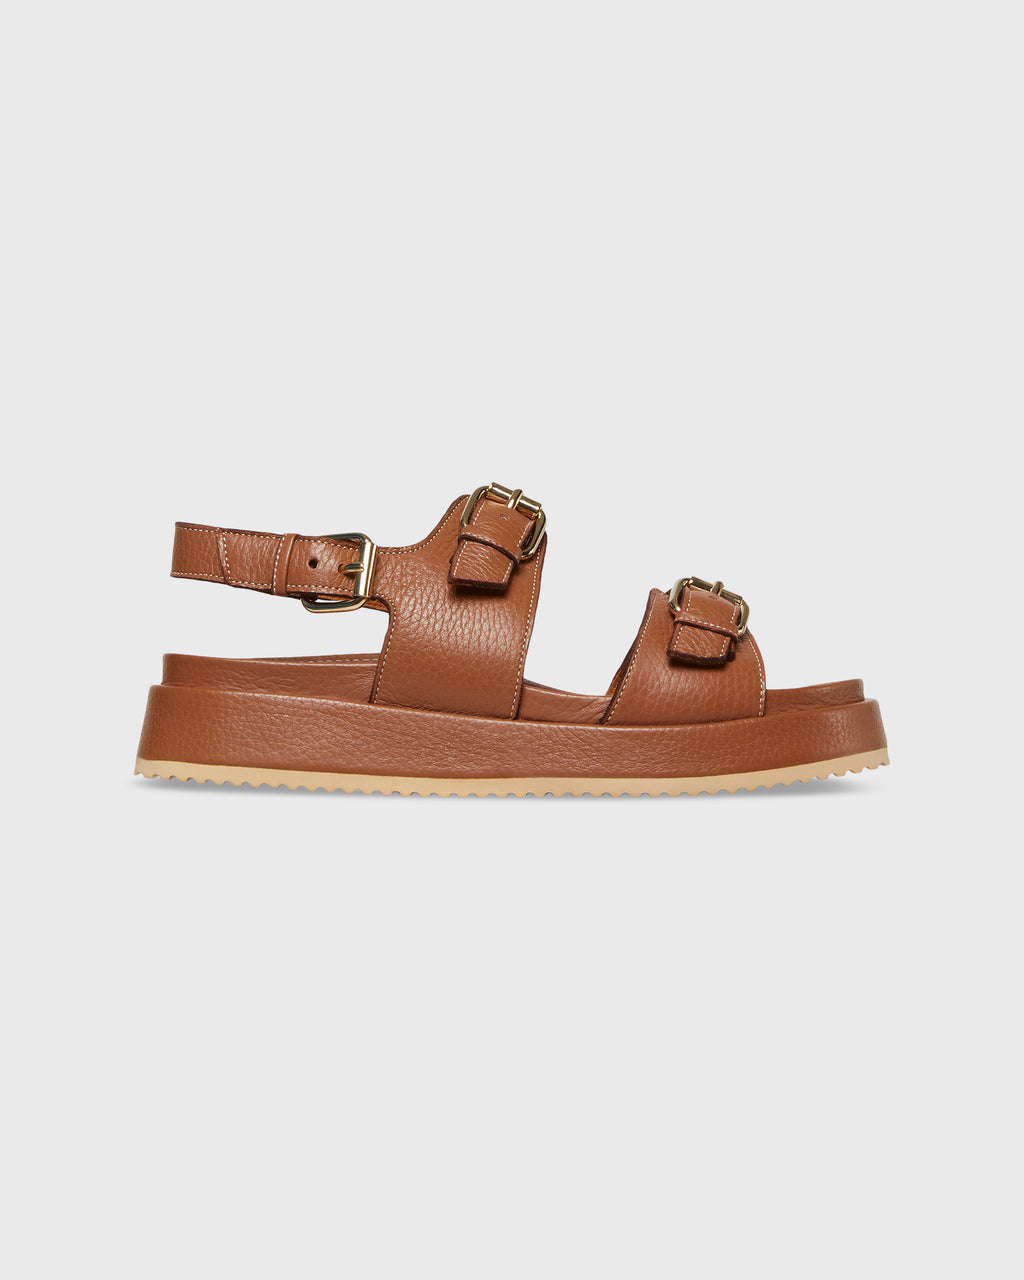 Share more than 266 brown two strap sandals latest